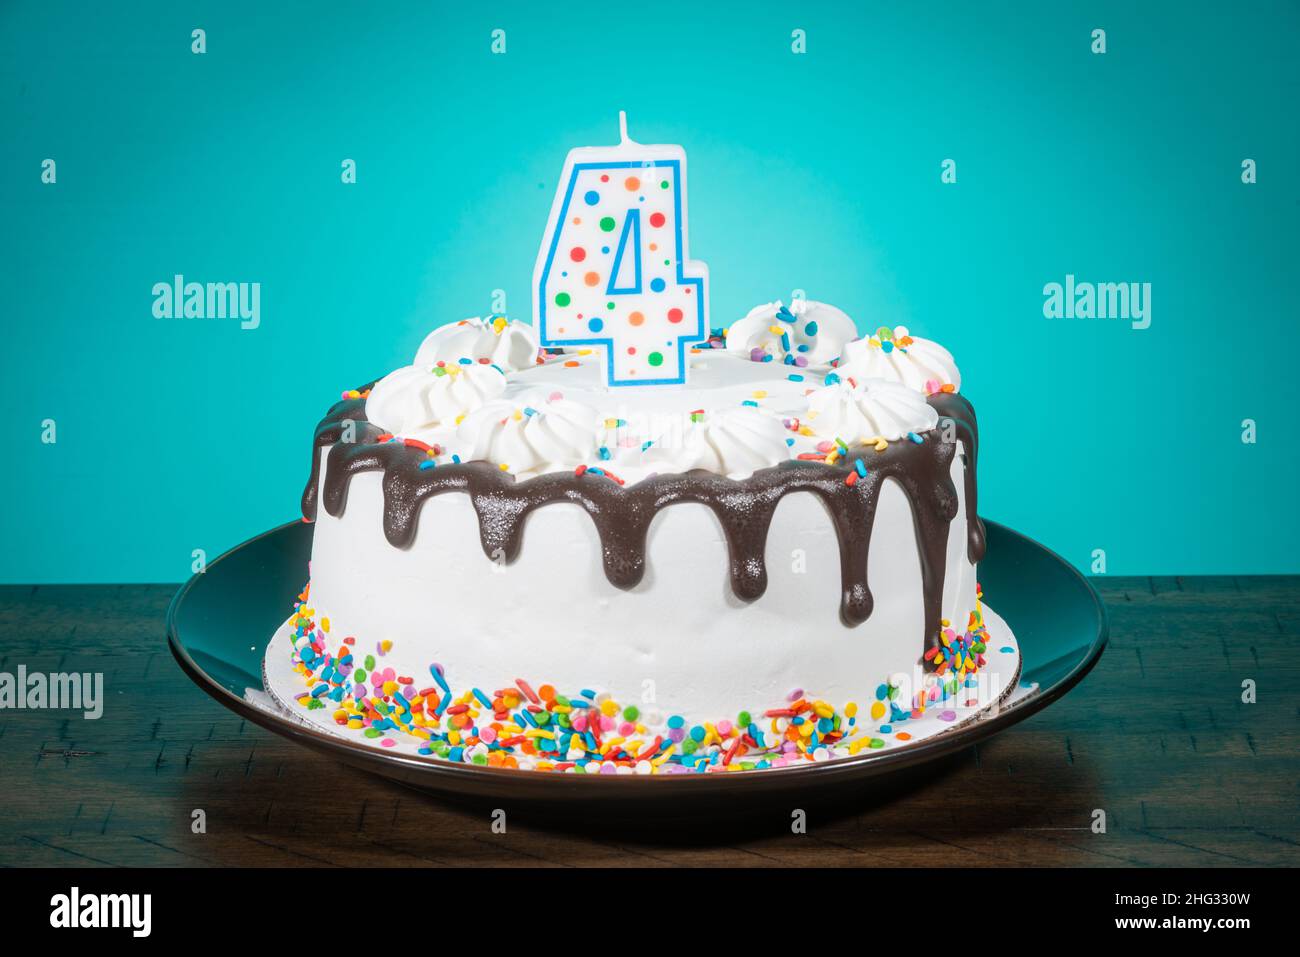 A birthday cake bears a candle in the shape of the number 4. Stock Photo